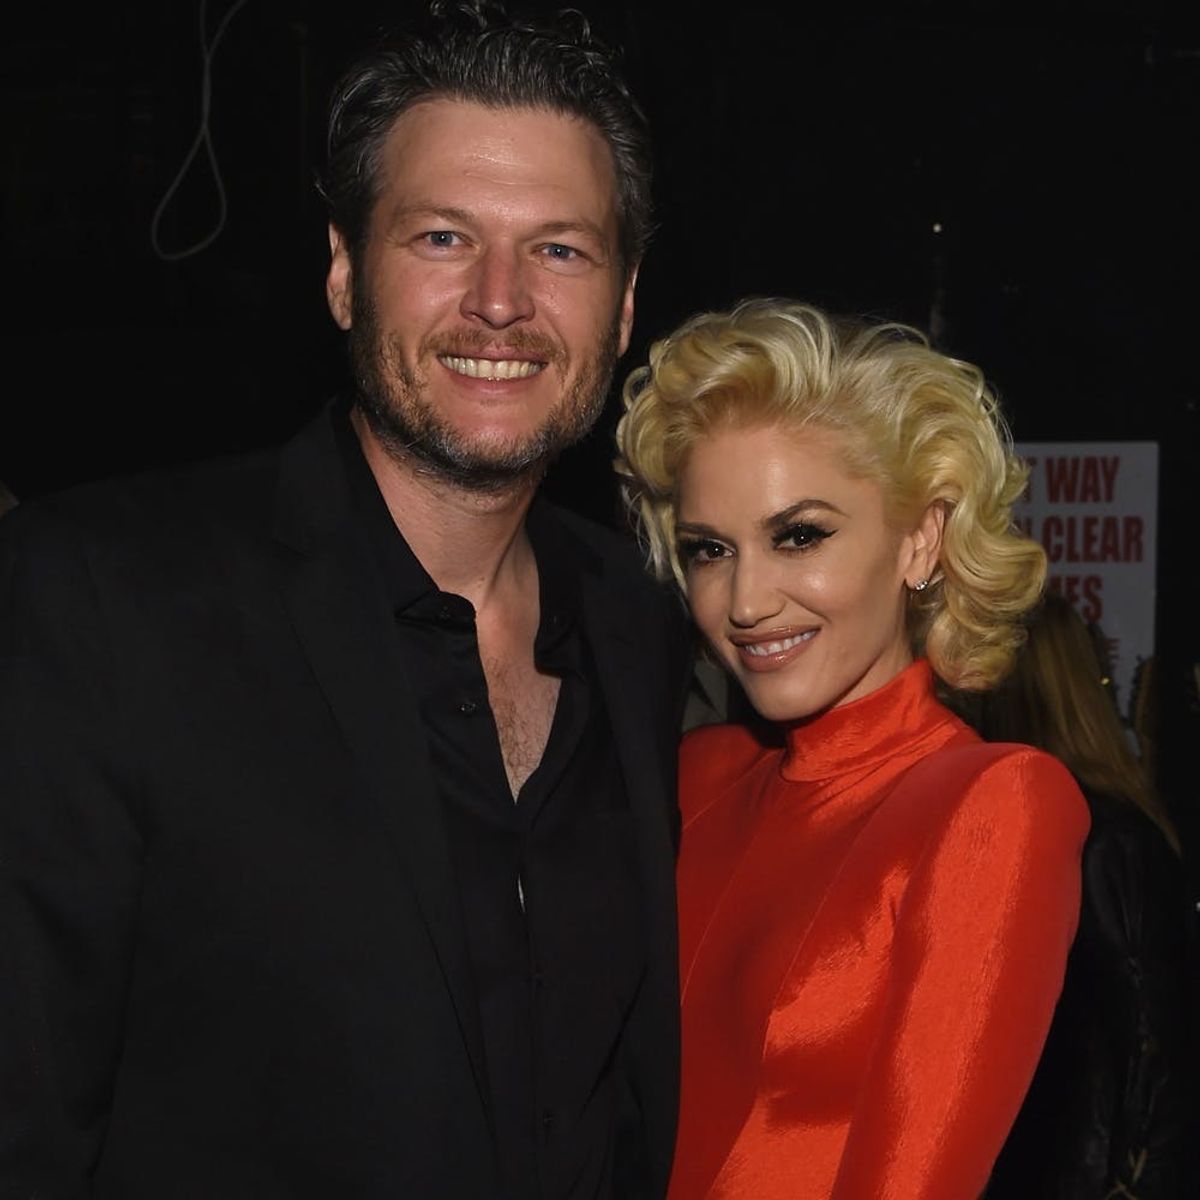 Gwen Stefani + Blake Shelton May Actually Be Tying the Knot After All